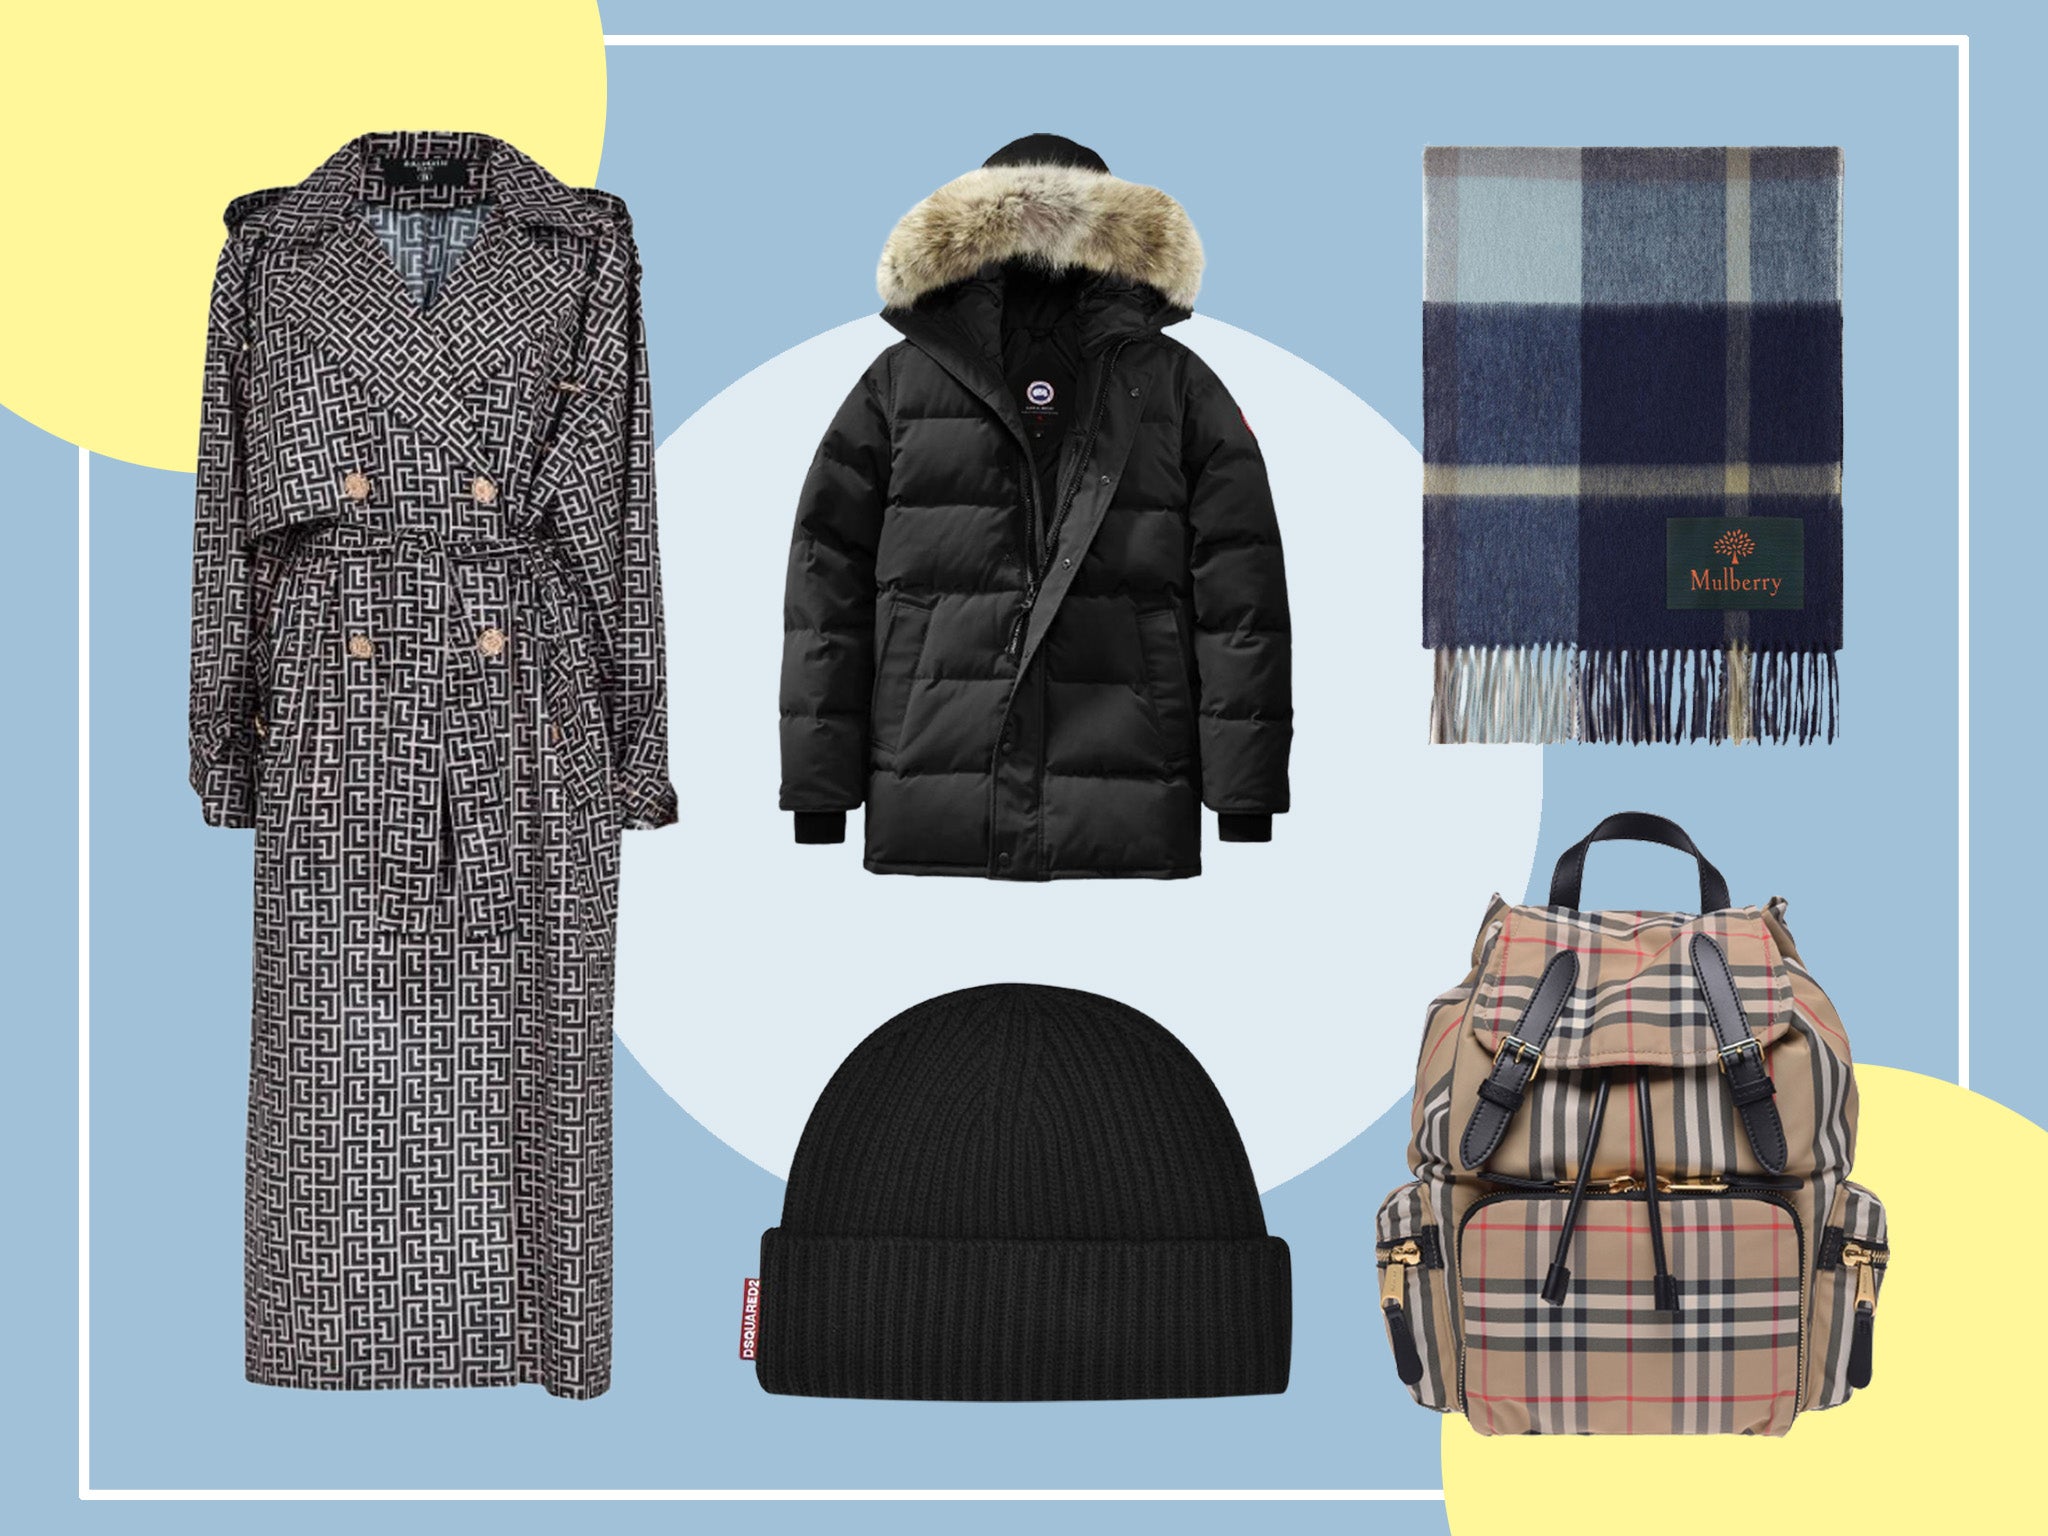 Whether you’re in the market for a coat, shoes, bag or otherwise, Flannels’s sale is worth having on your radar